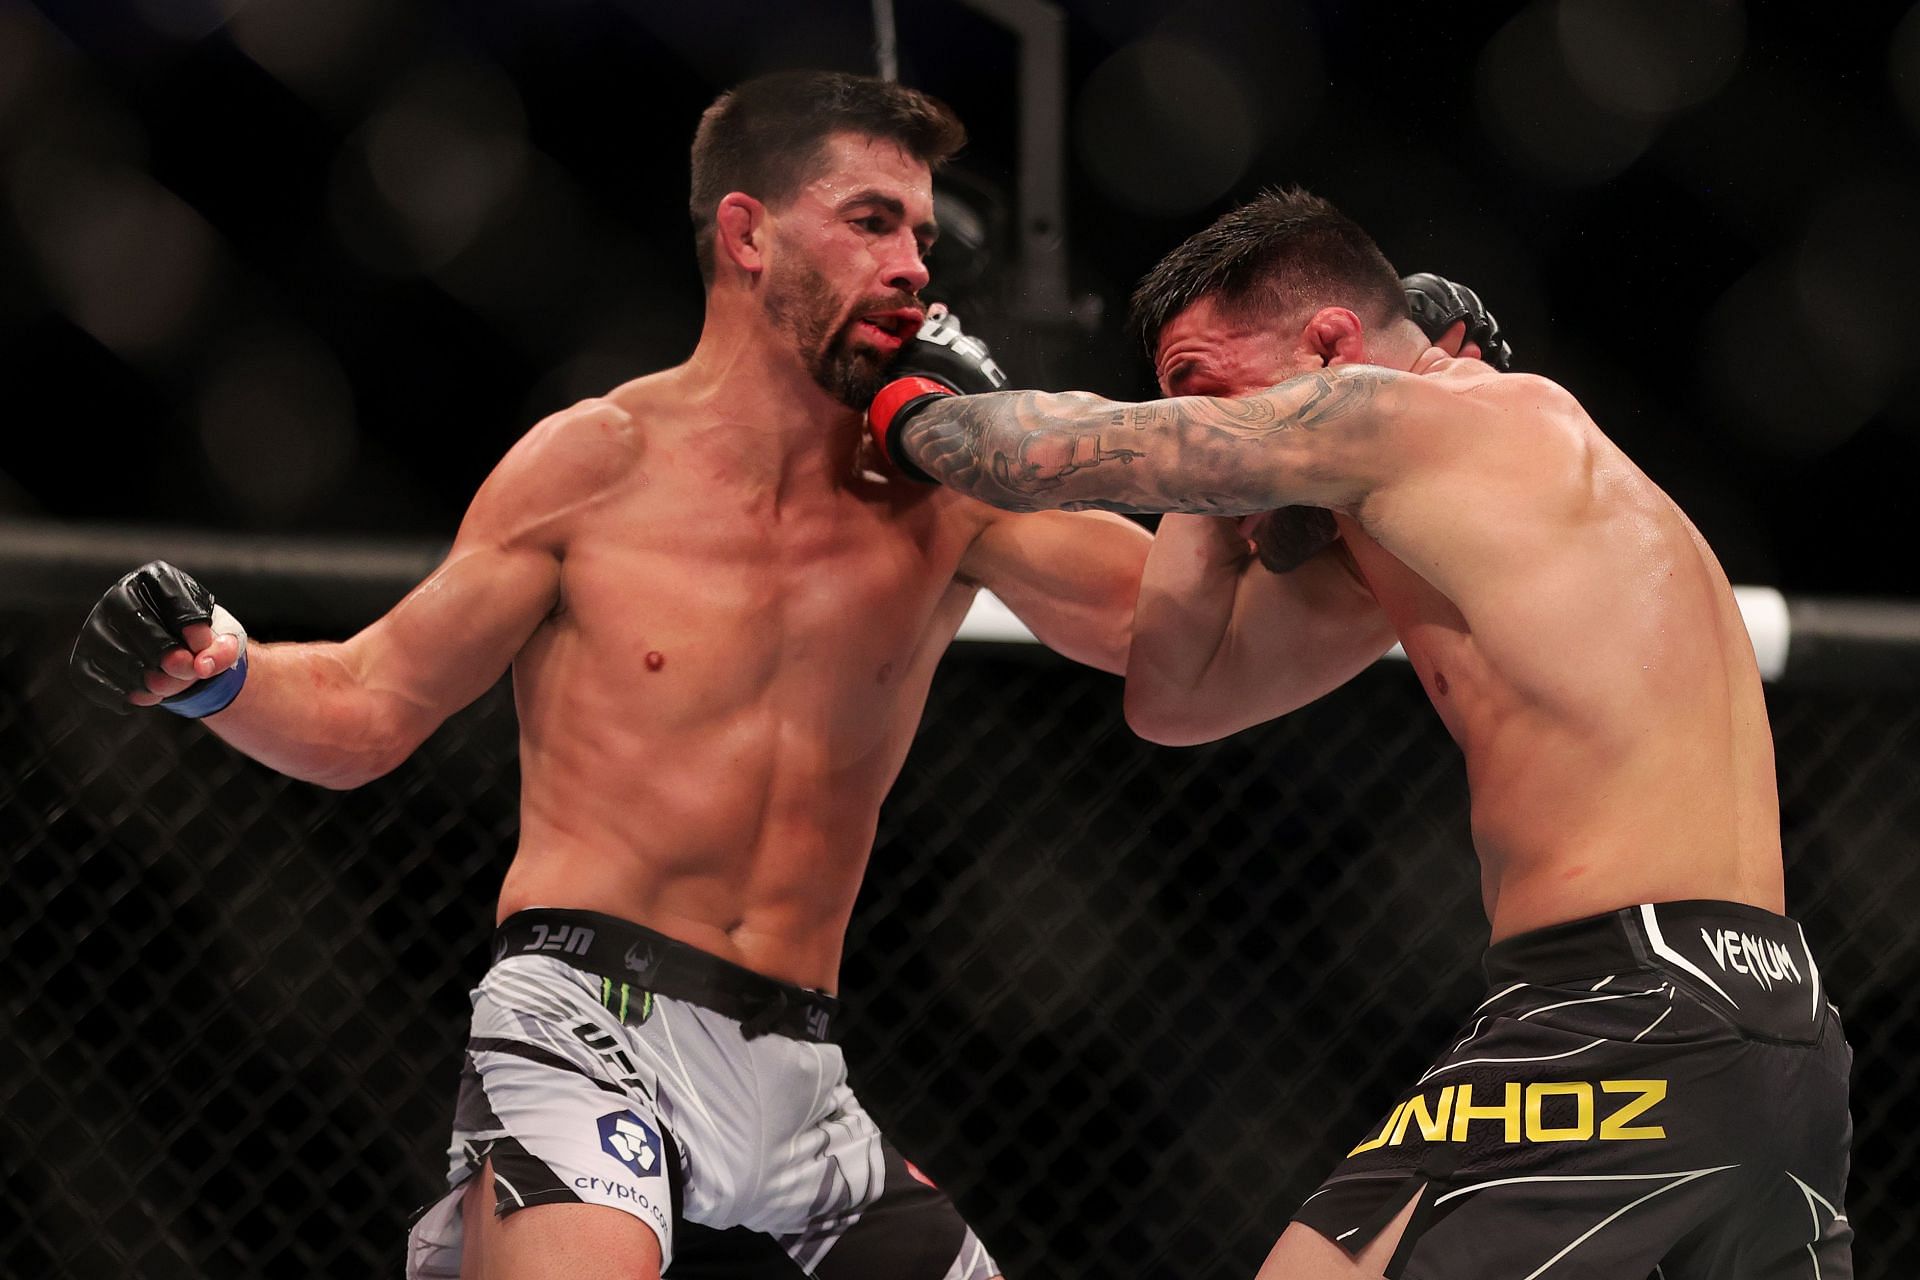 Dominick Cruz may be back in UFC title contention after his win over Pedro Munhoz